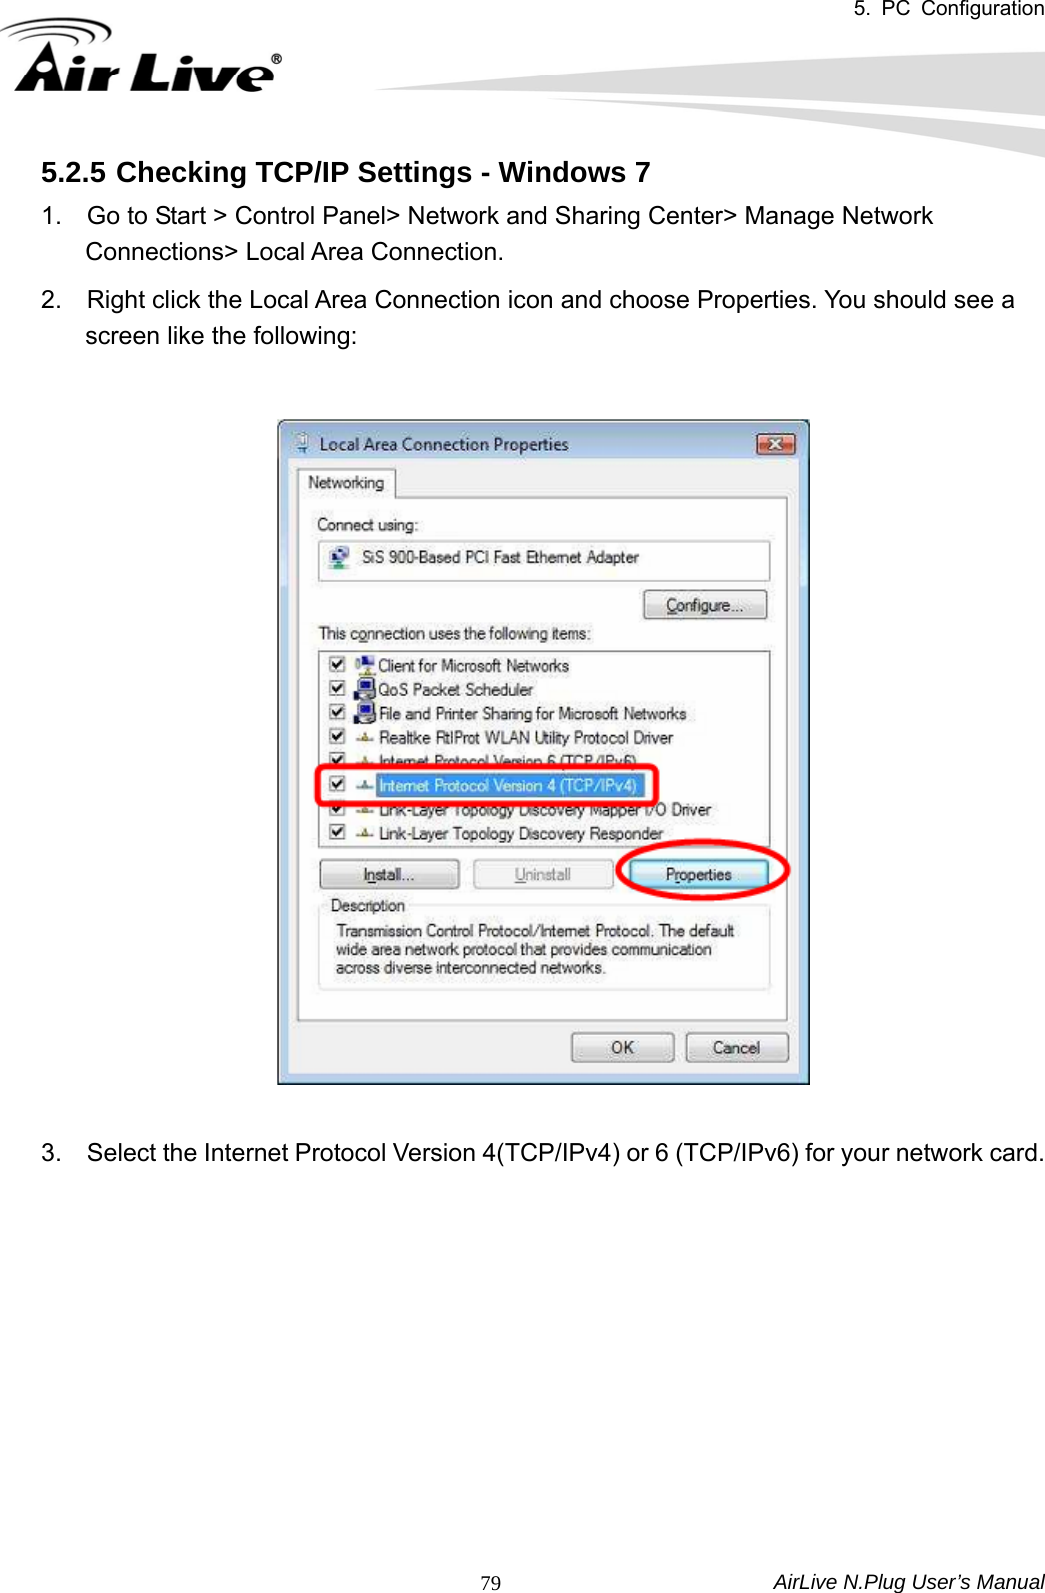 5. PC Configuration  AirLive N.Plug User’s Manual  795.2.5 Checking TCP/IP Settings - Windows 7 1.    Go to Start &gt; Control Panel&gt; Network and Sharing Center&gt; Manage Network Connections&gt; Local Area Connection.   2.    Right click the Local Area Connection icon and choose Properties. You should see a screen like the following:    3.    Select the Internet Protocol Version 4(TCP/IPv4) or 6 (TCP/IPv6) for your network card.            